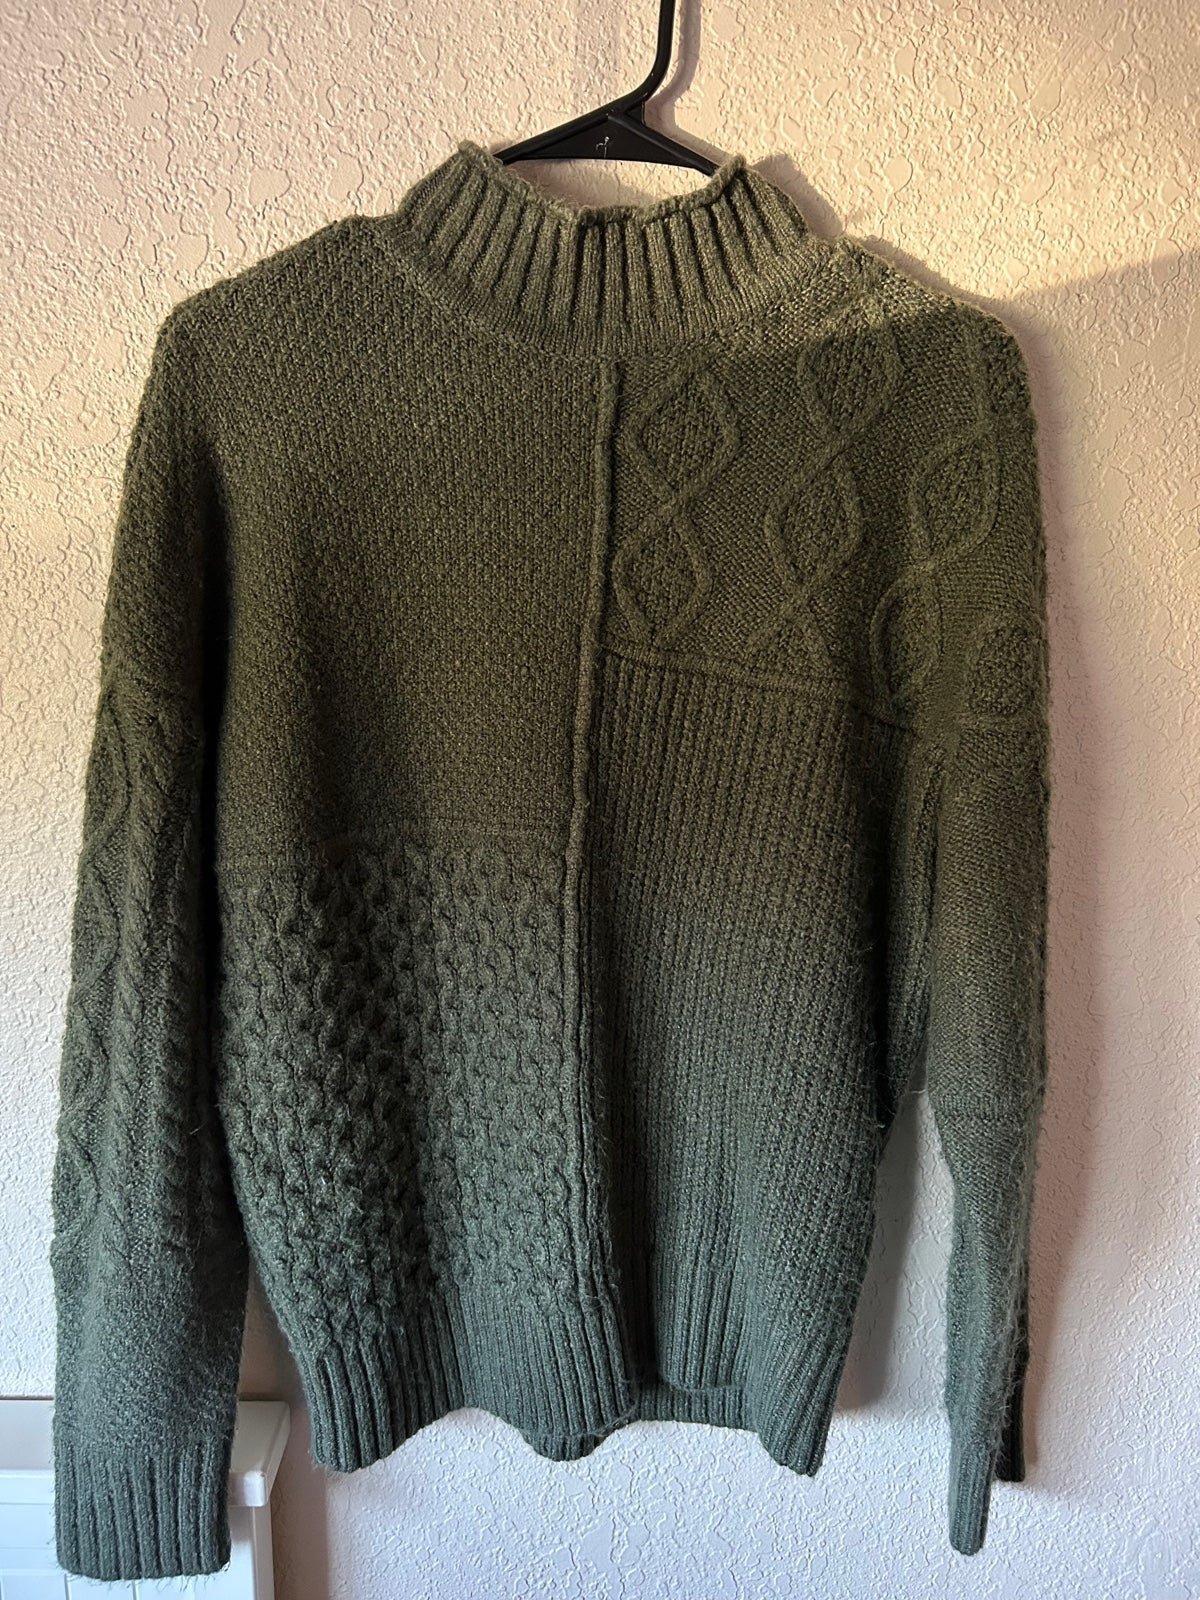 Promotions  American Eagle Sweater MGChjxkKt well sale